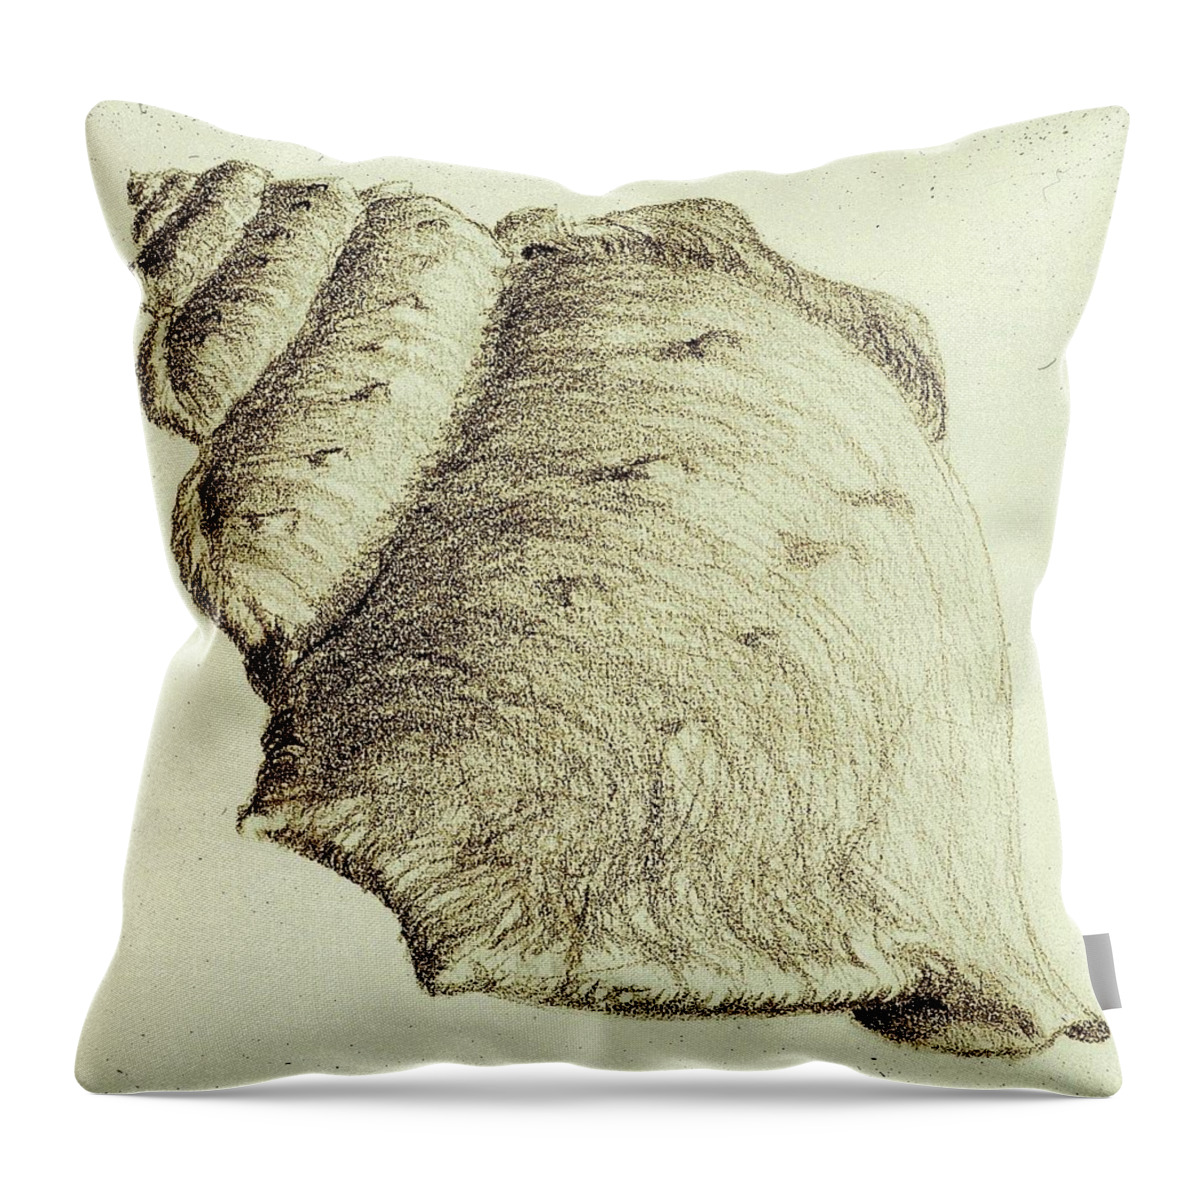 Pencil Throw Pillow featuring the drawing Shell by Karen Buford